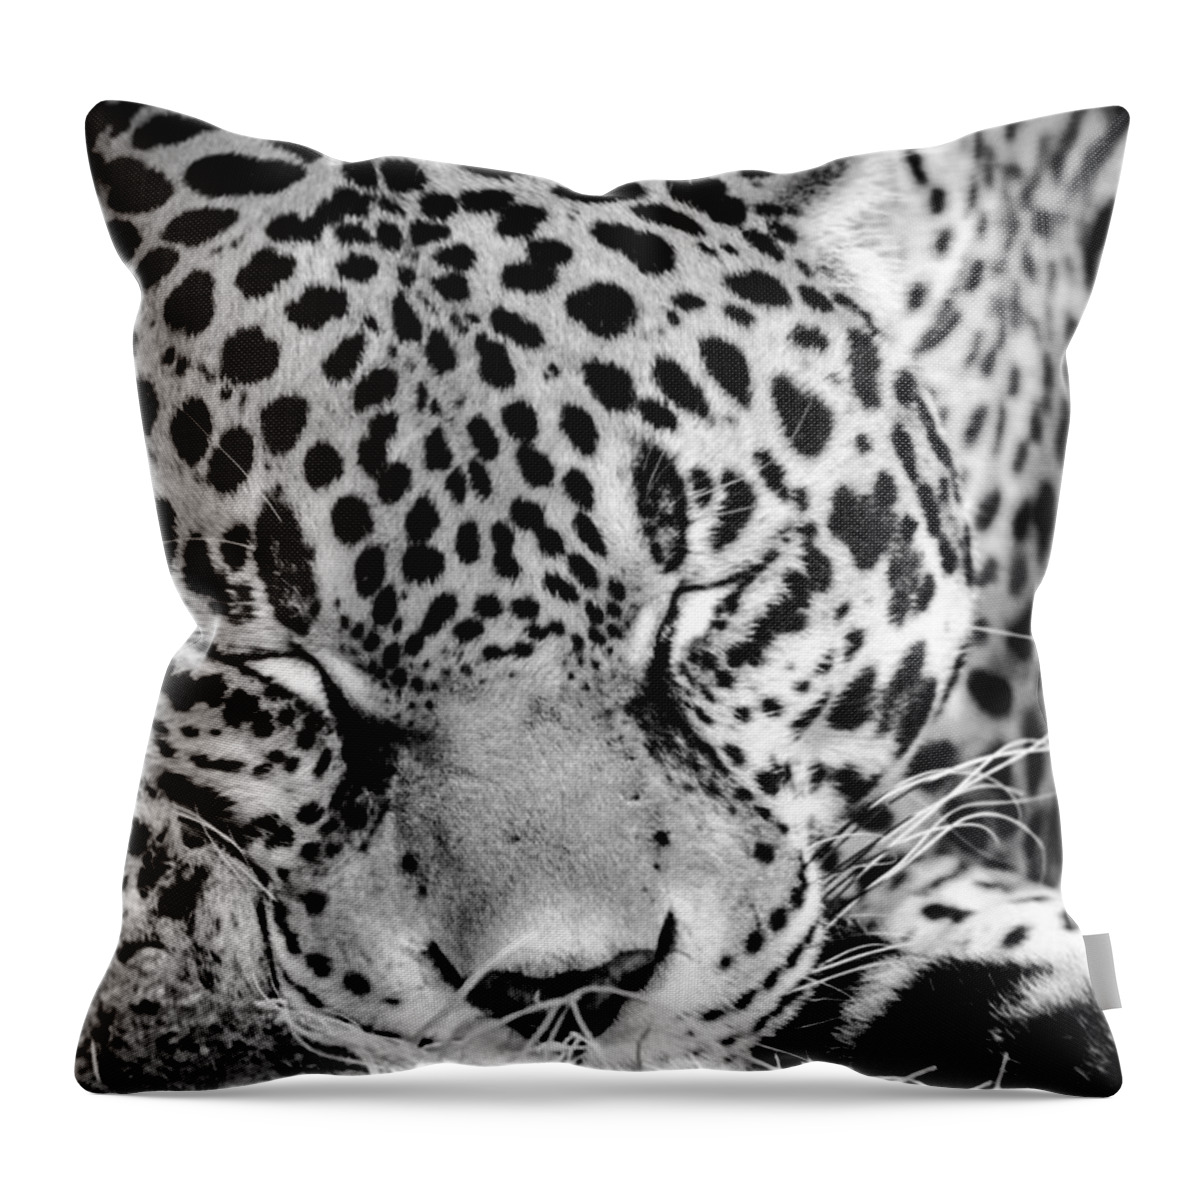 Leopard Throw Pillow featuring the photograph Sleeping by Wild Fotos